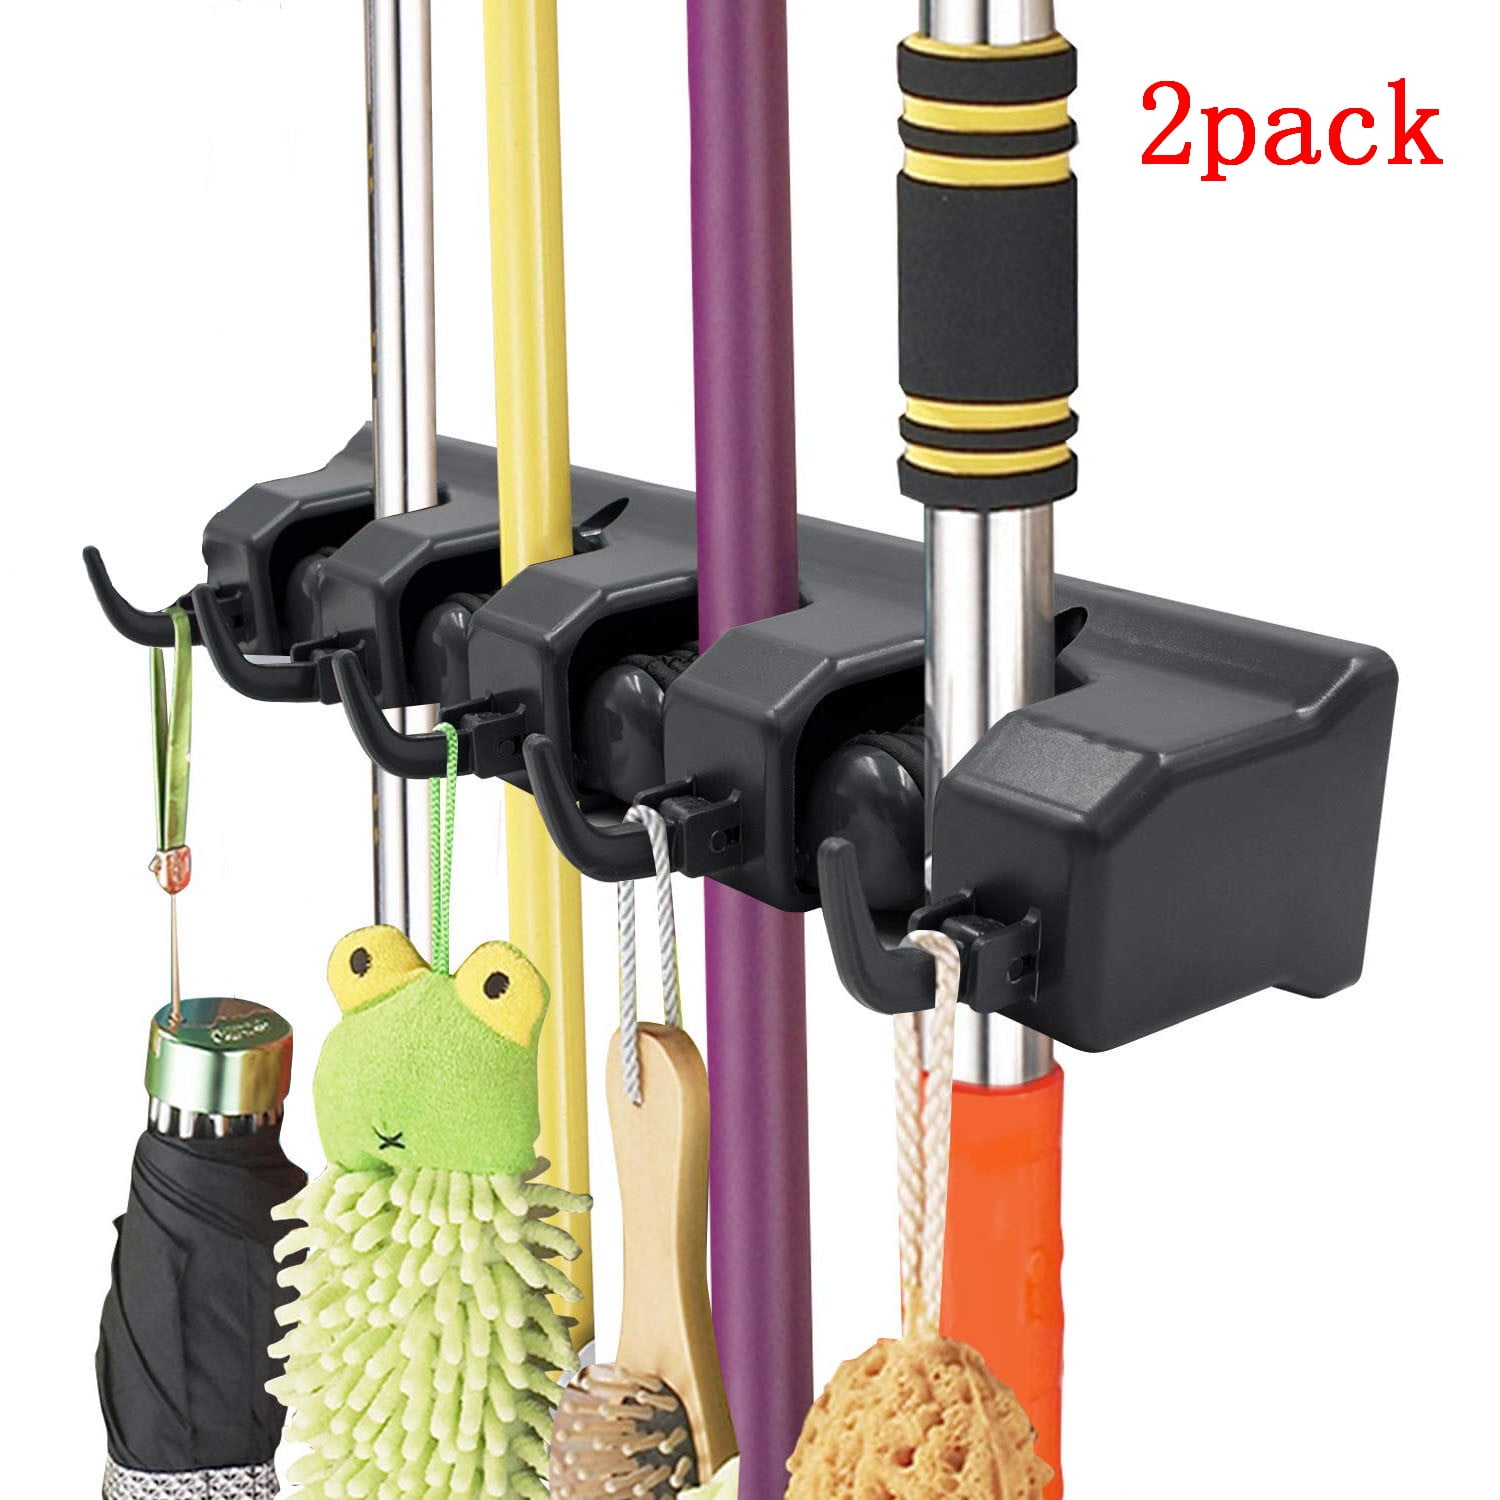 Wall Mounted Mop Holder Broom Rack Brush Hanger Cleaning Tools Kitchen Storage 